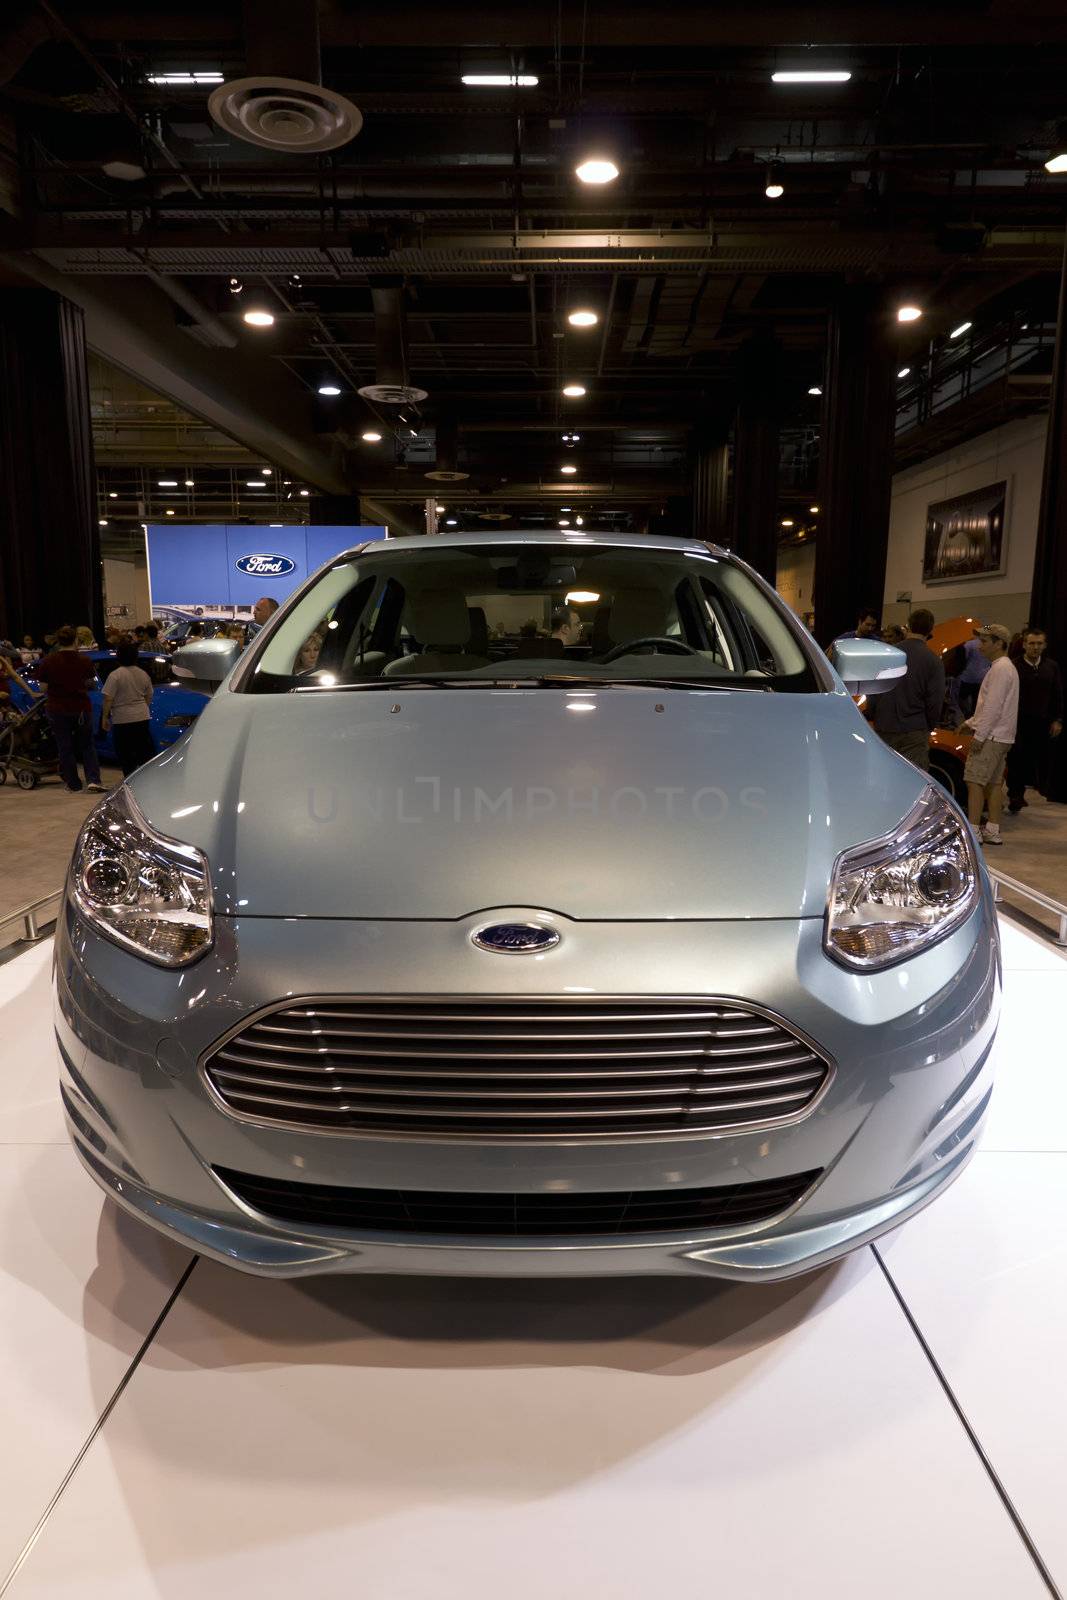 HOUSTON - JANUARY 2012: The Ford Focus Electric car at the Houston International Auto Show on January 28, 2012 in Houston, Texas.